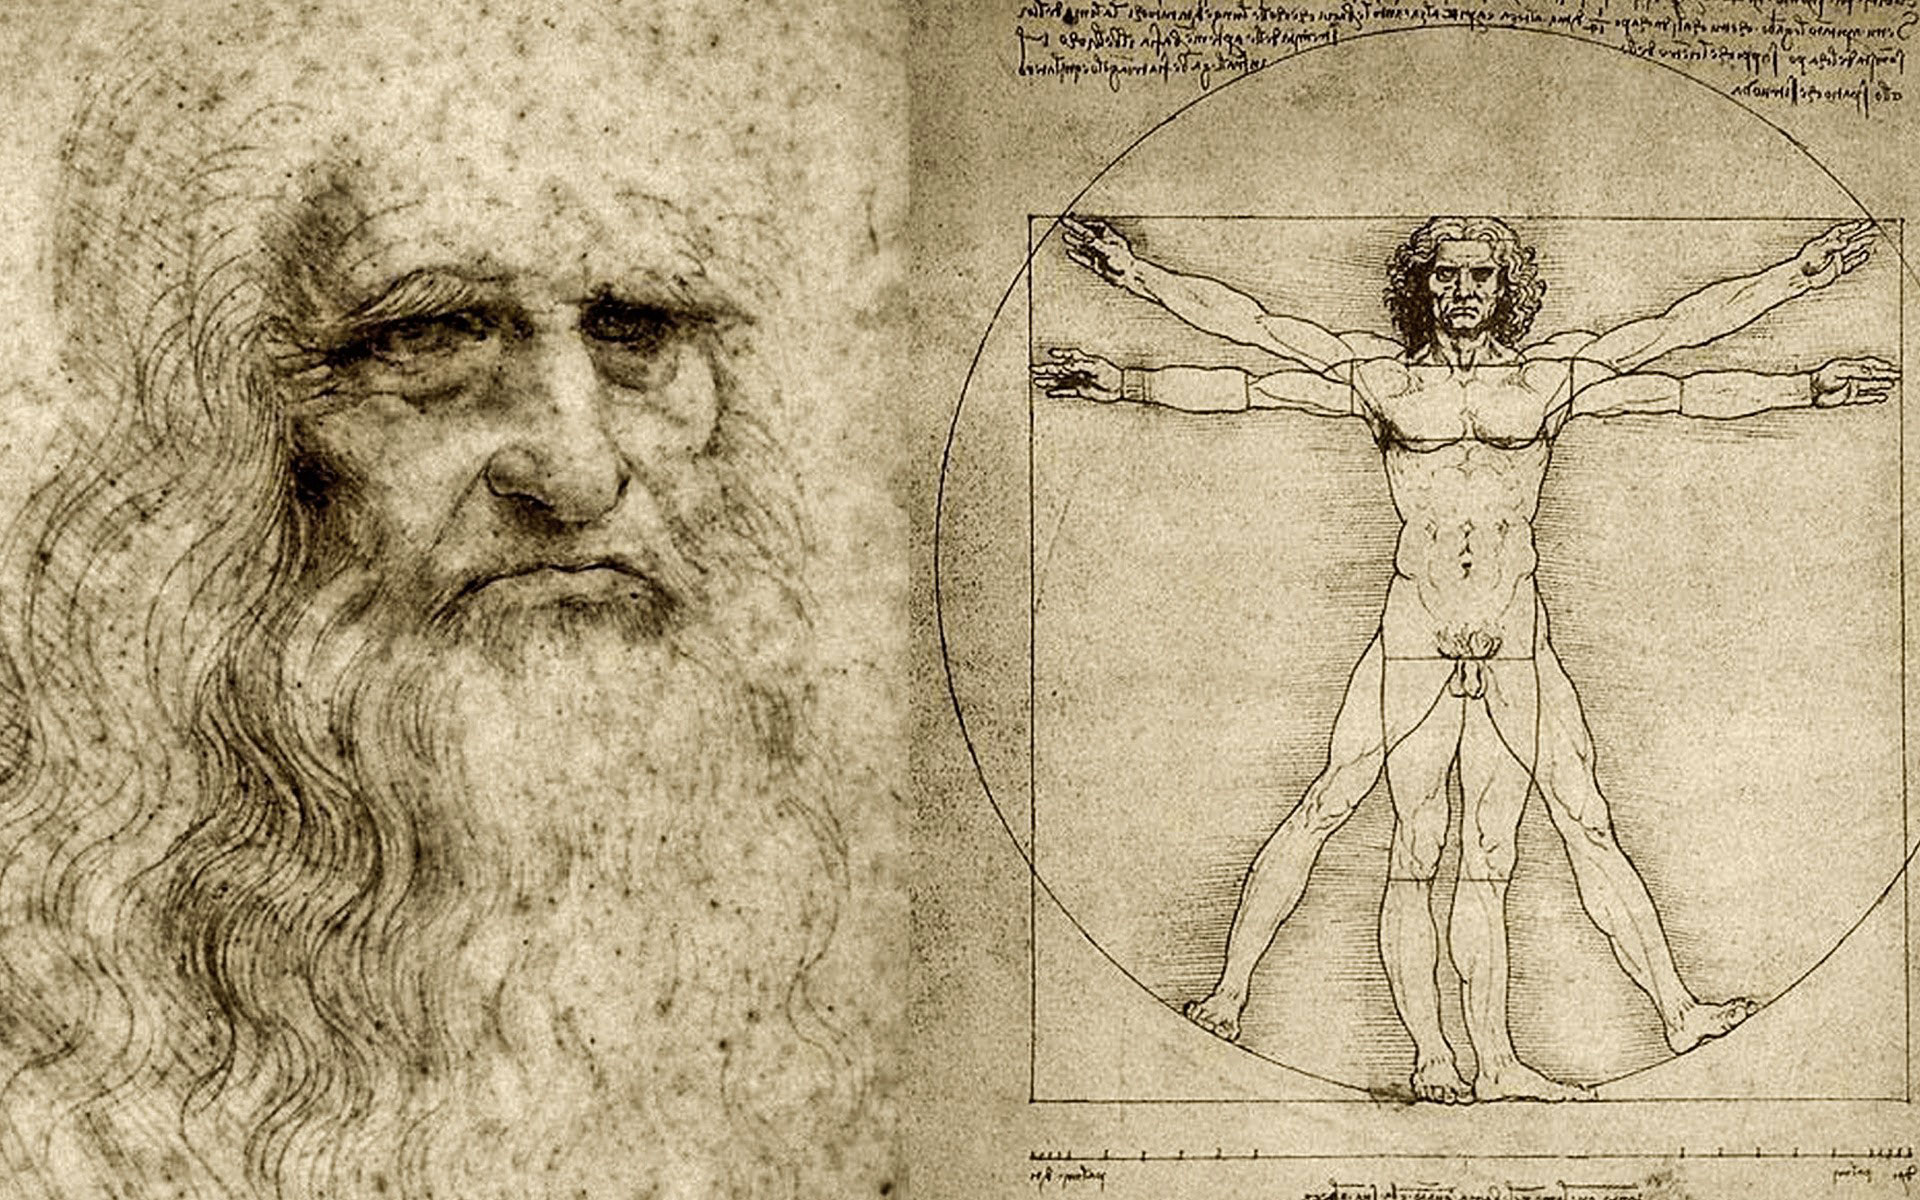 Dive into a weekend of culture: “Milan and Leonardo”